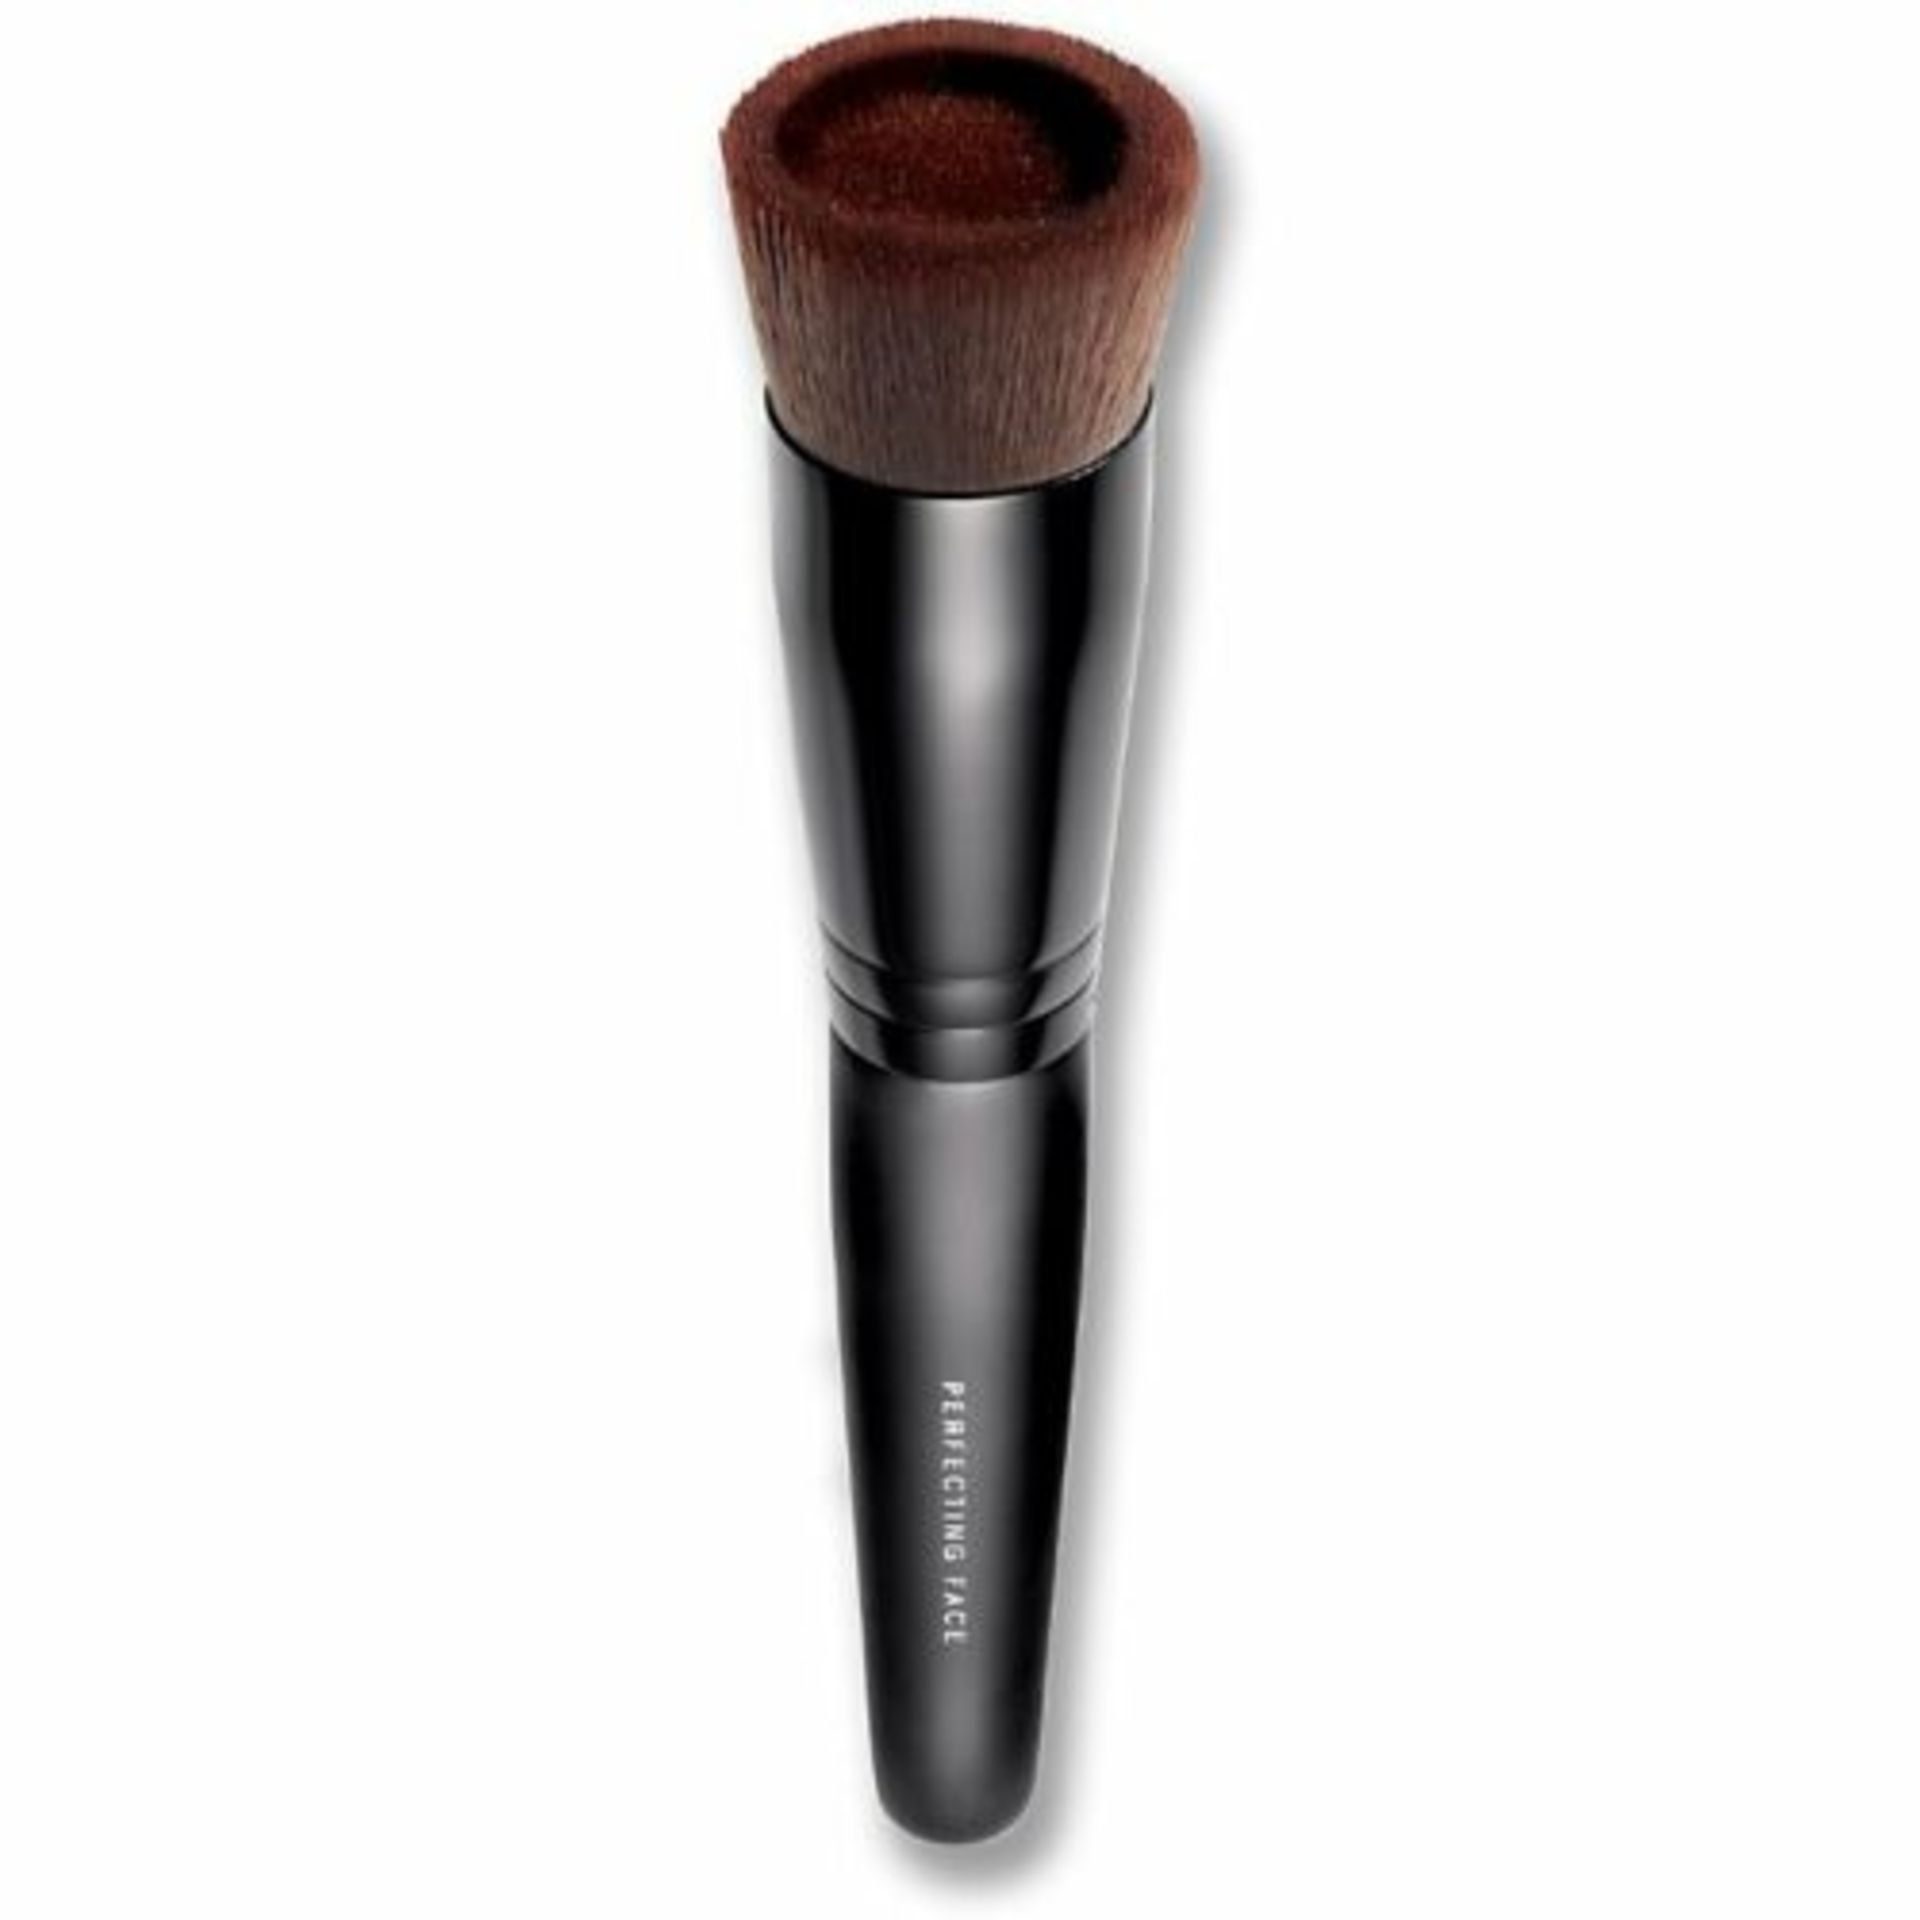 1 x Bare Escentuals bareMinerals “BARESKIN” Perfecting Face Brush - Genuine Product - Brand New - Image 4 of 14